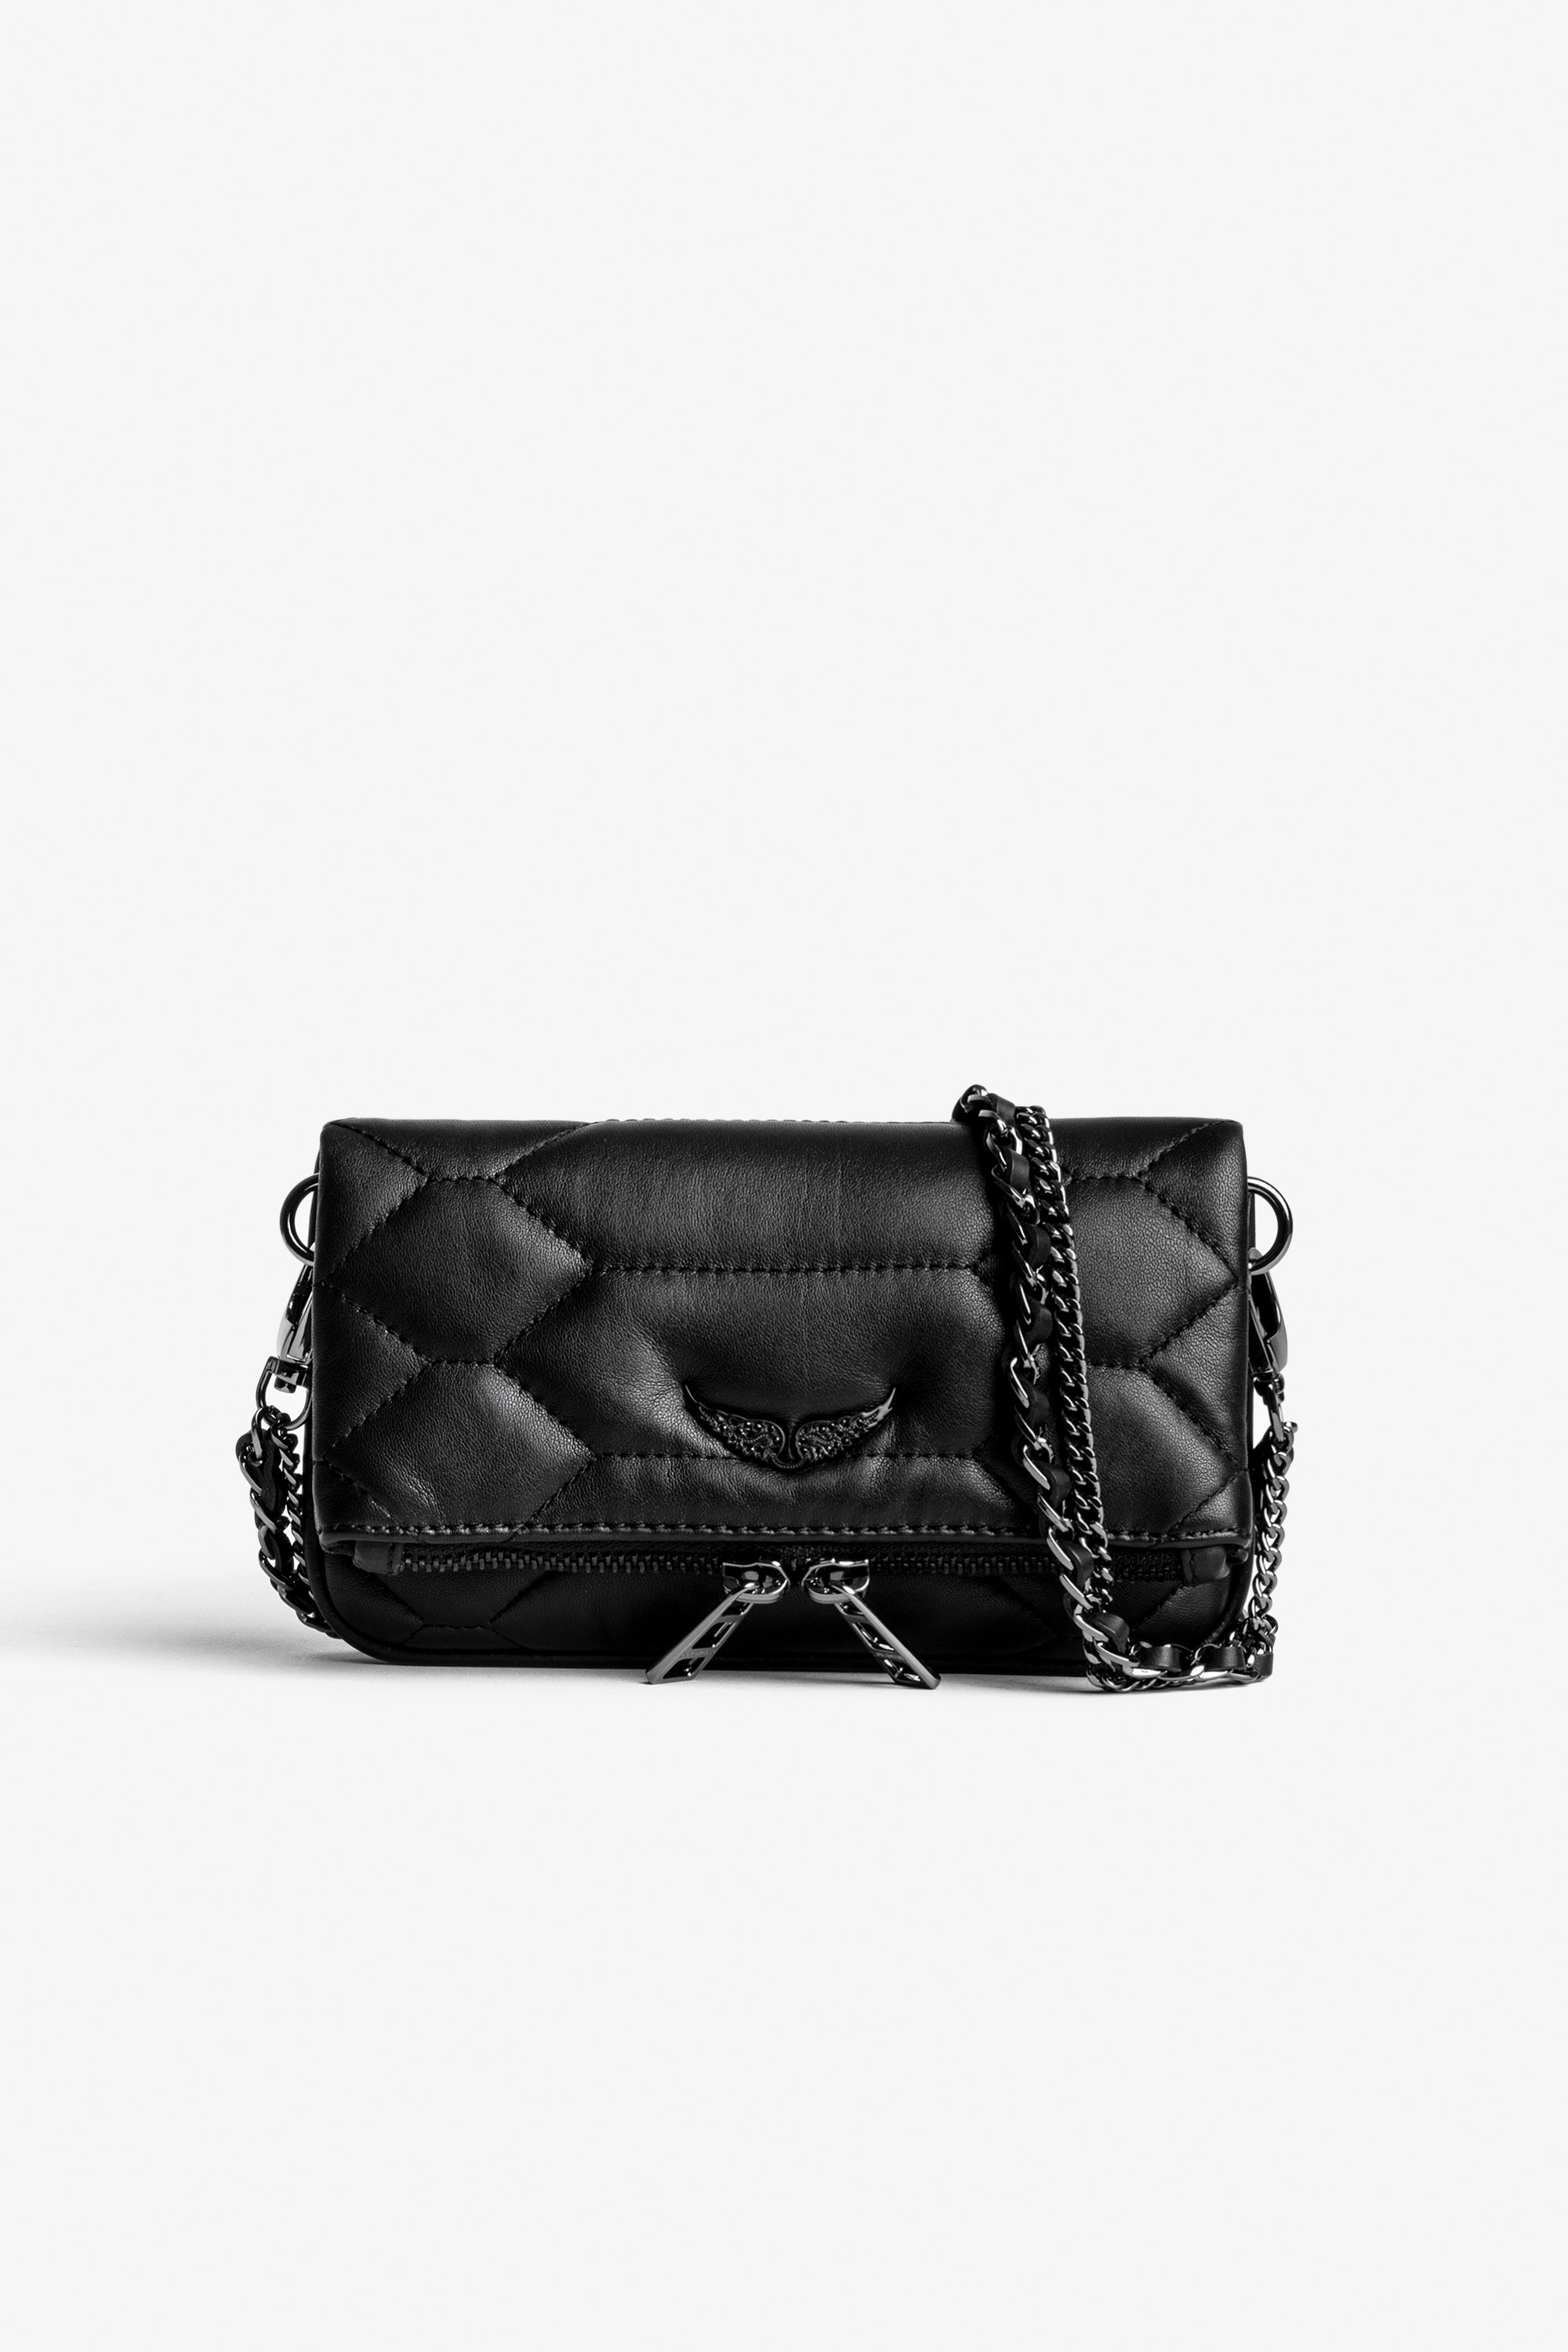 Rock Nano Quilted レザー クラッチバッグ - Rock Nano Black Quilted Leather Clutch